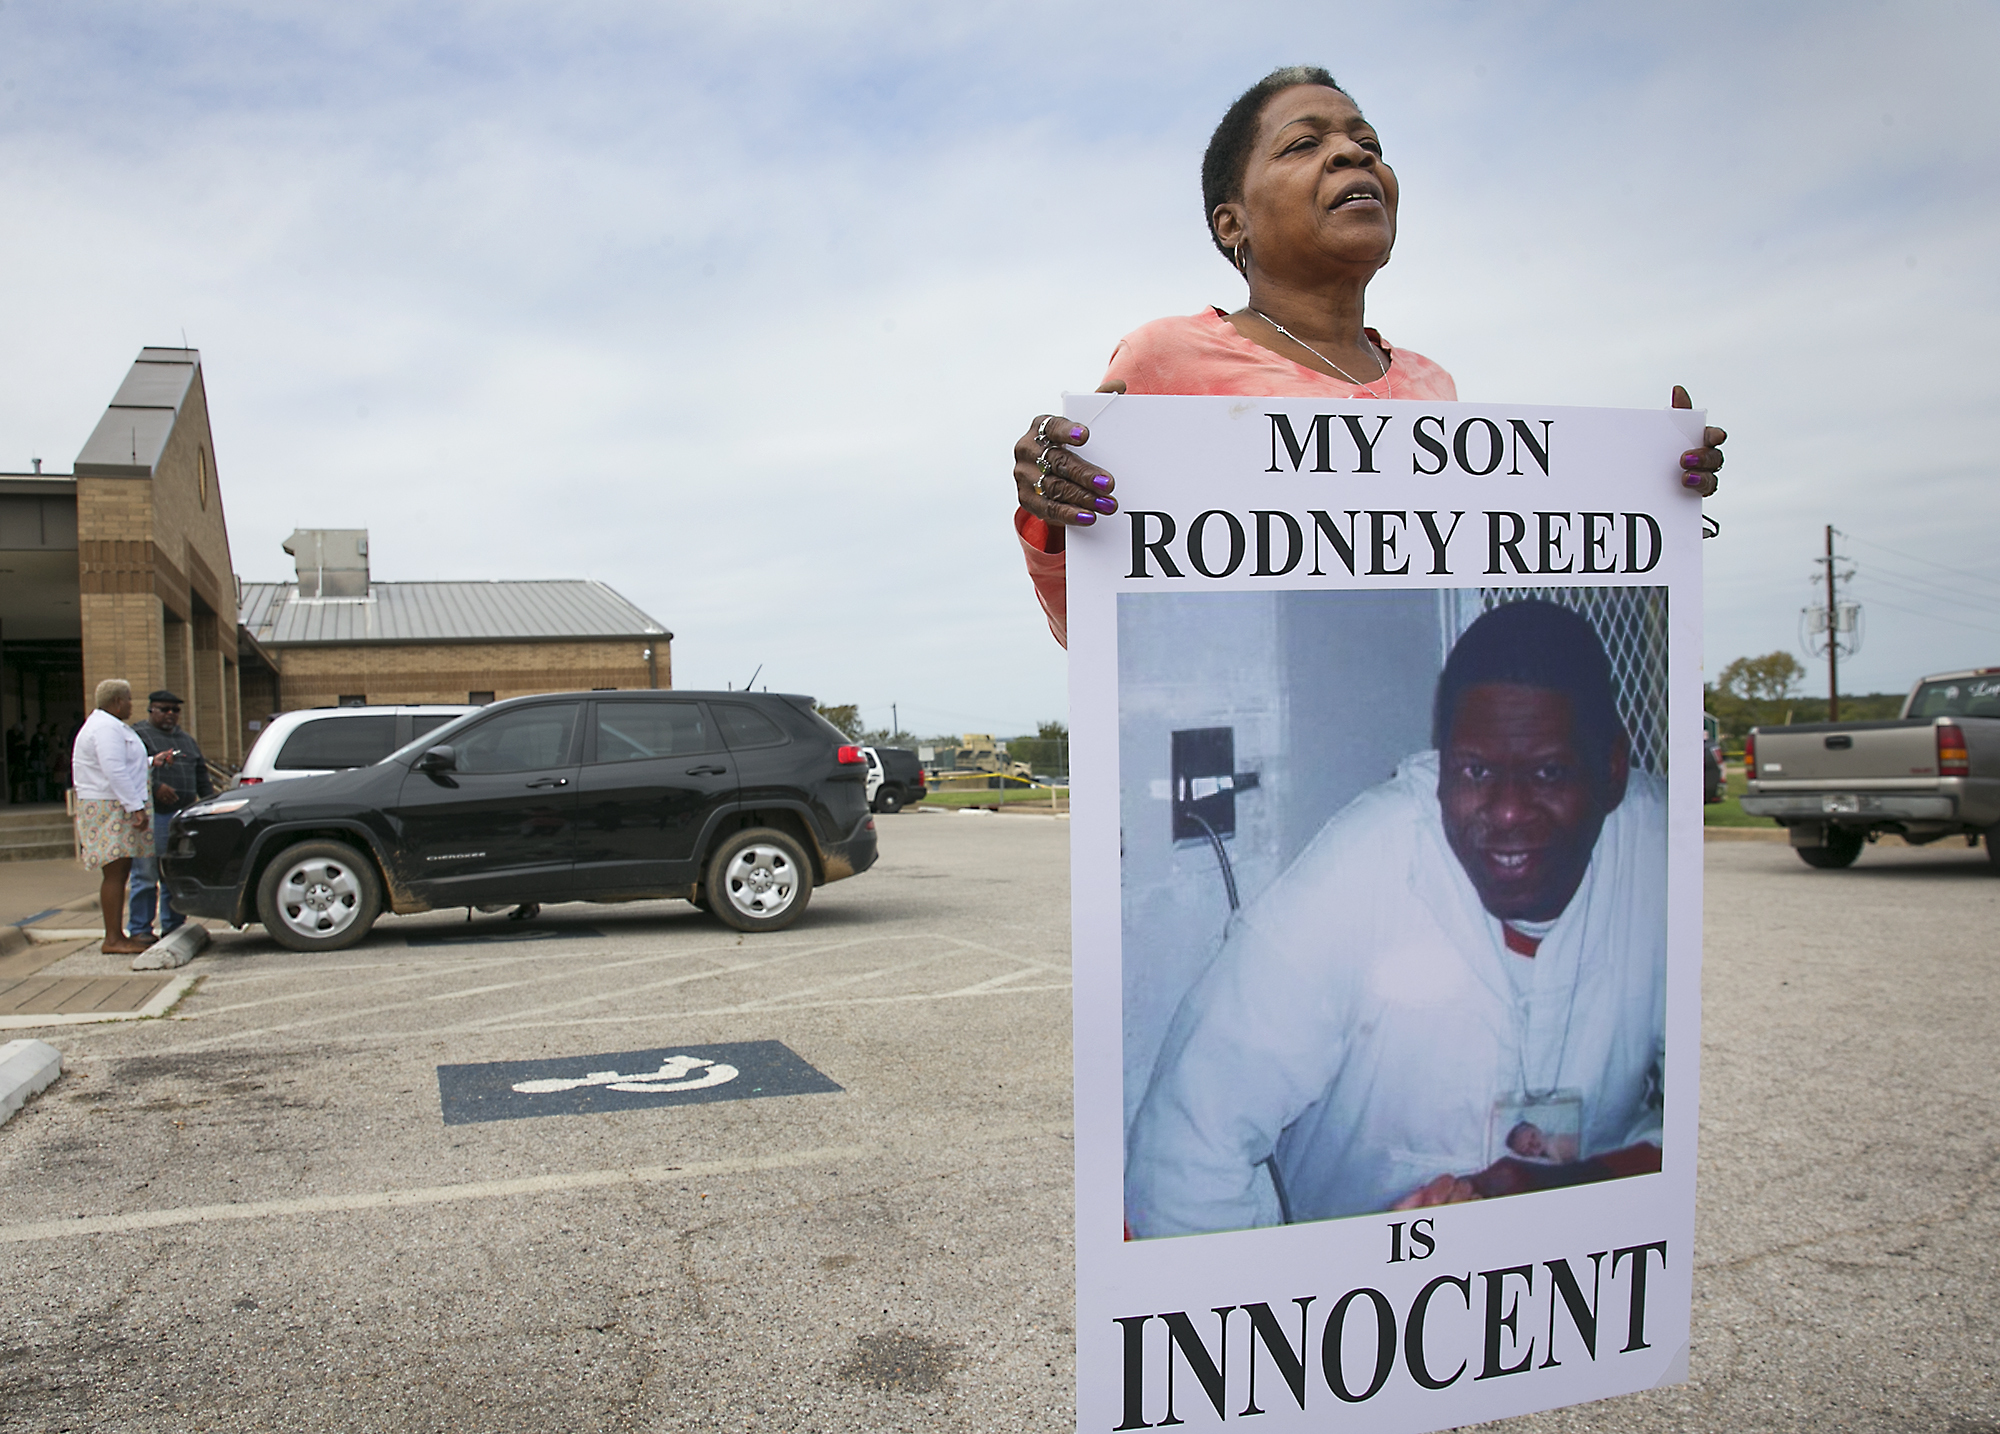 Sandra Reed, the mother of Rodney Reed, shows her continued support for her son outside a Texas courtroom on Oct. 10, 2017. (Ralph Barrera/Austin American-Statesman via AP)